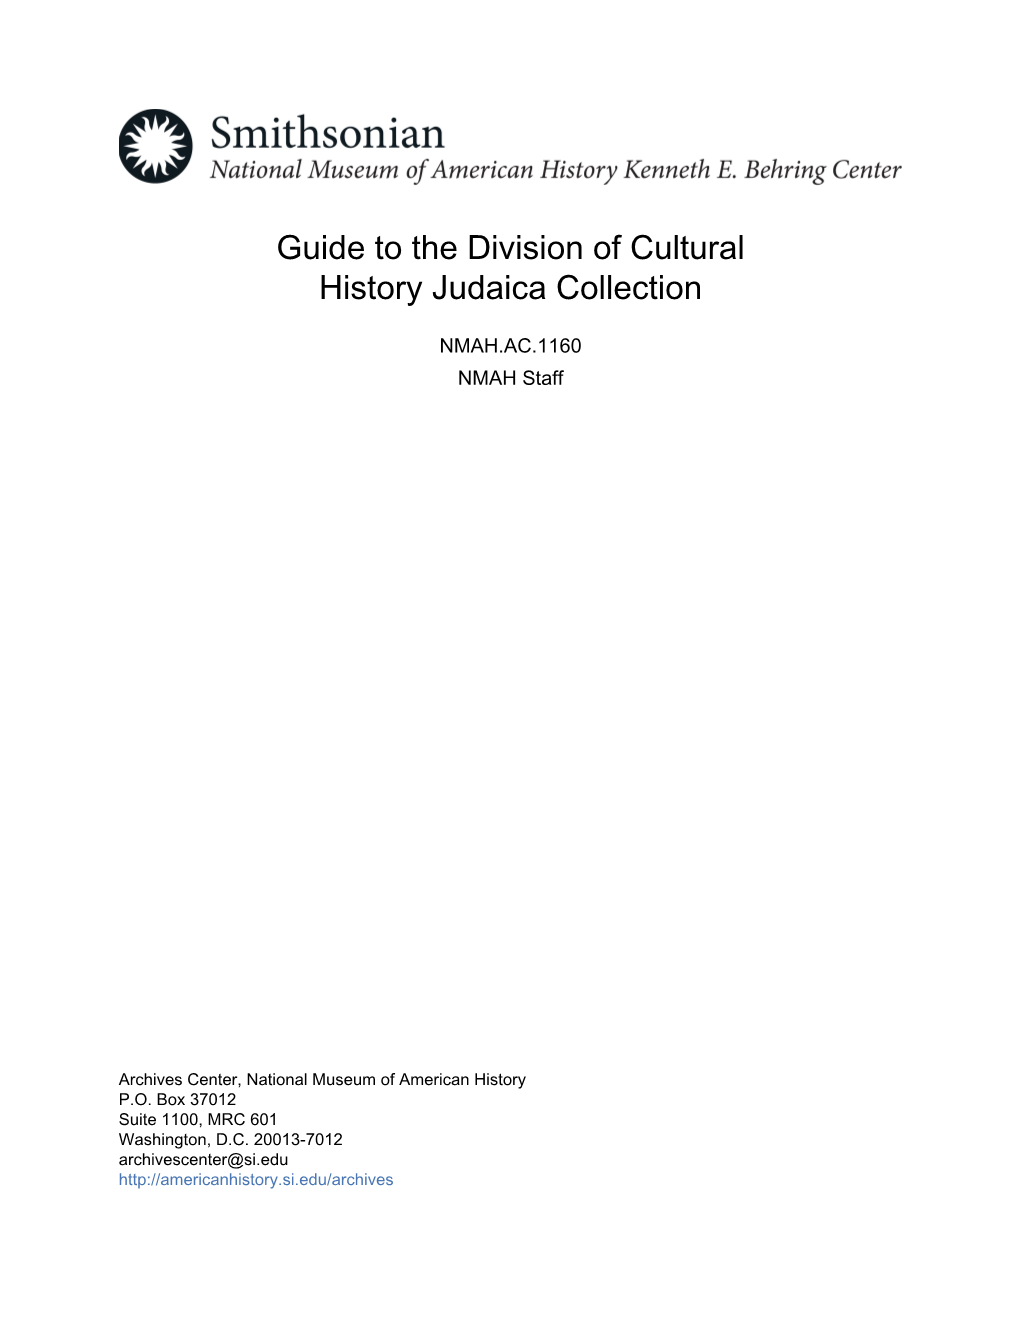 Guide to the Division of Cultural History Judaica Collection